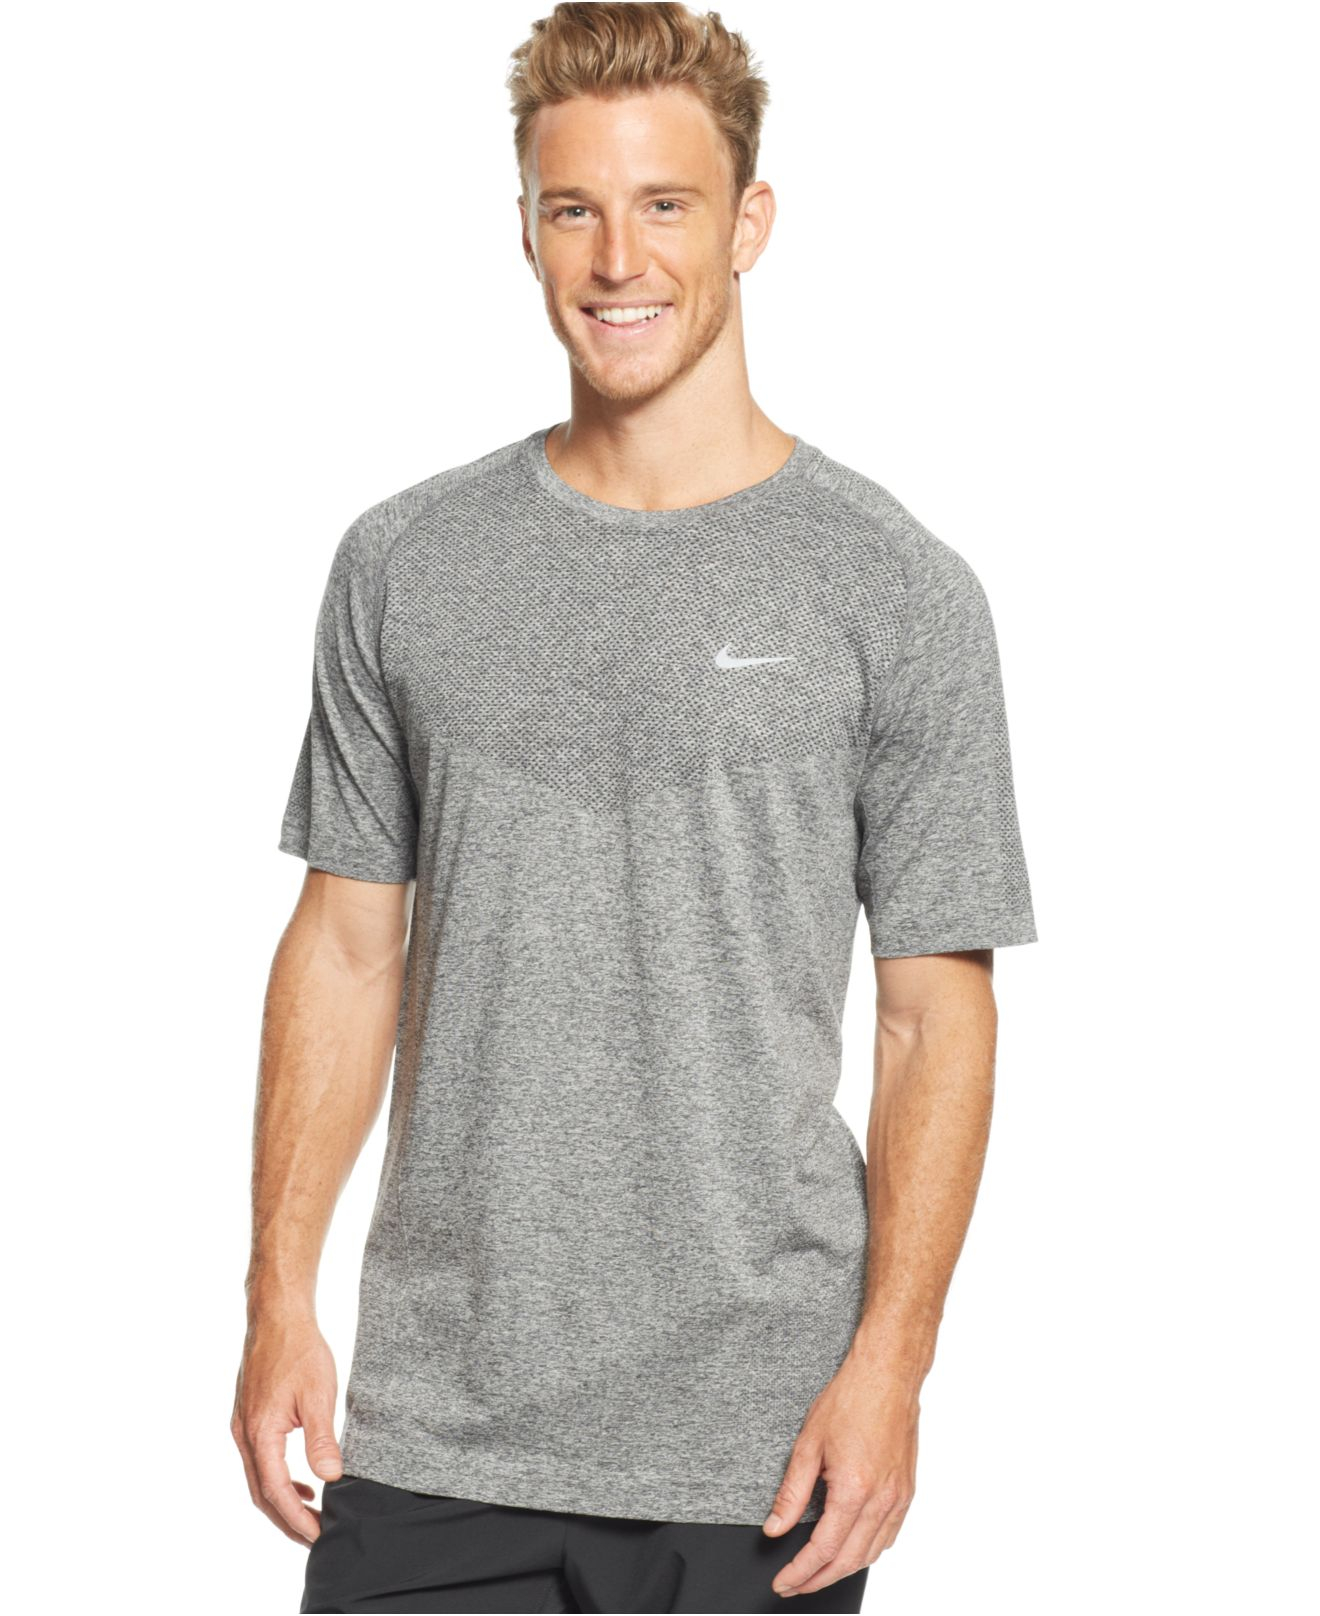 Lyst - Nike Dri-fit Crew-neck Performance T-shirt in Gray for Men